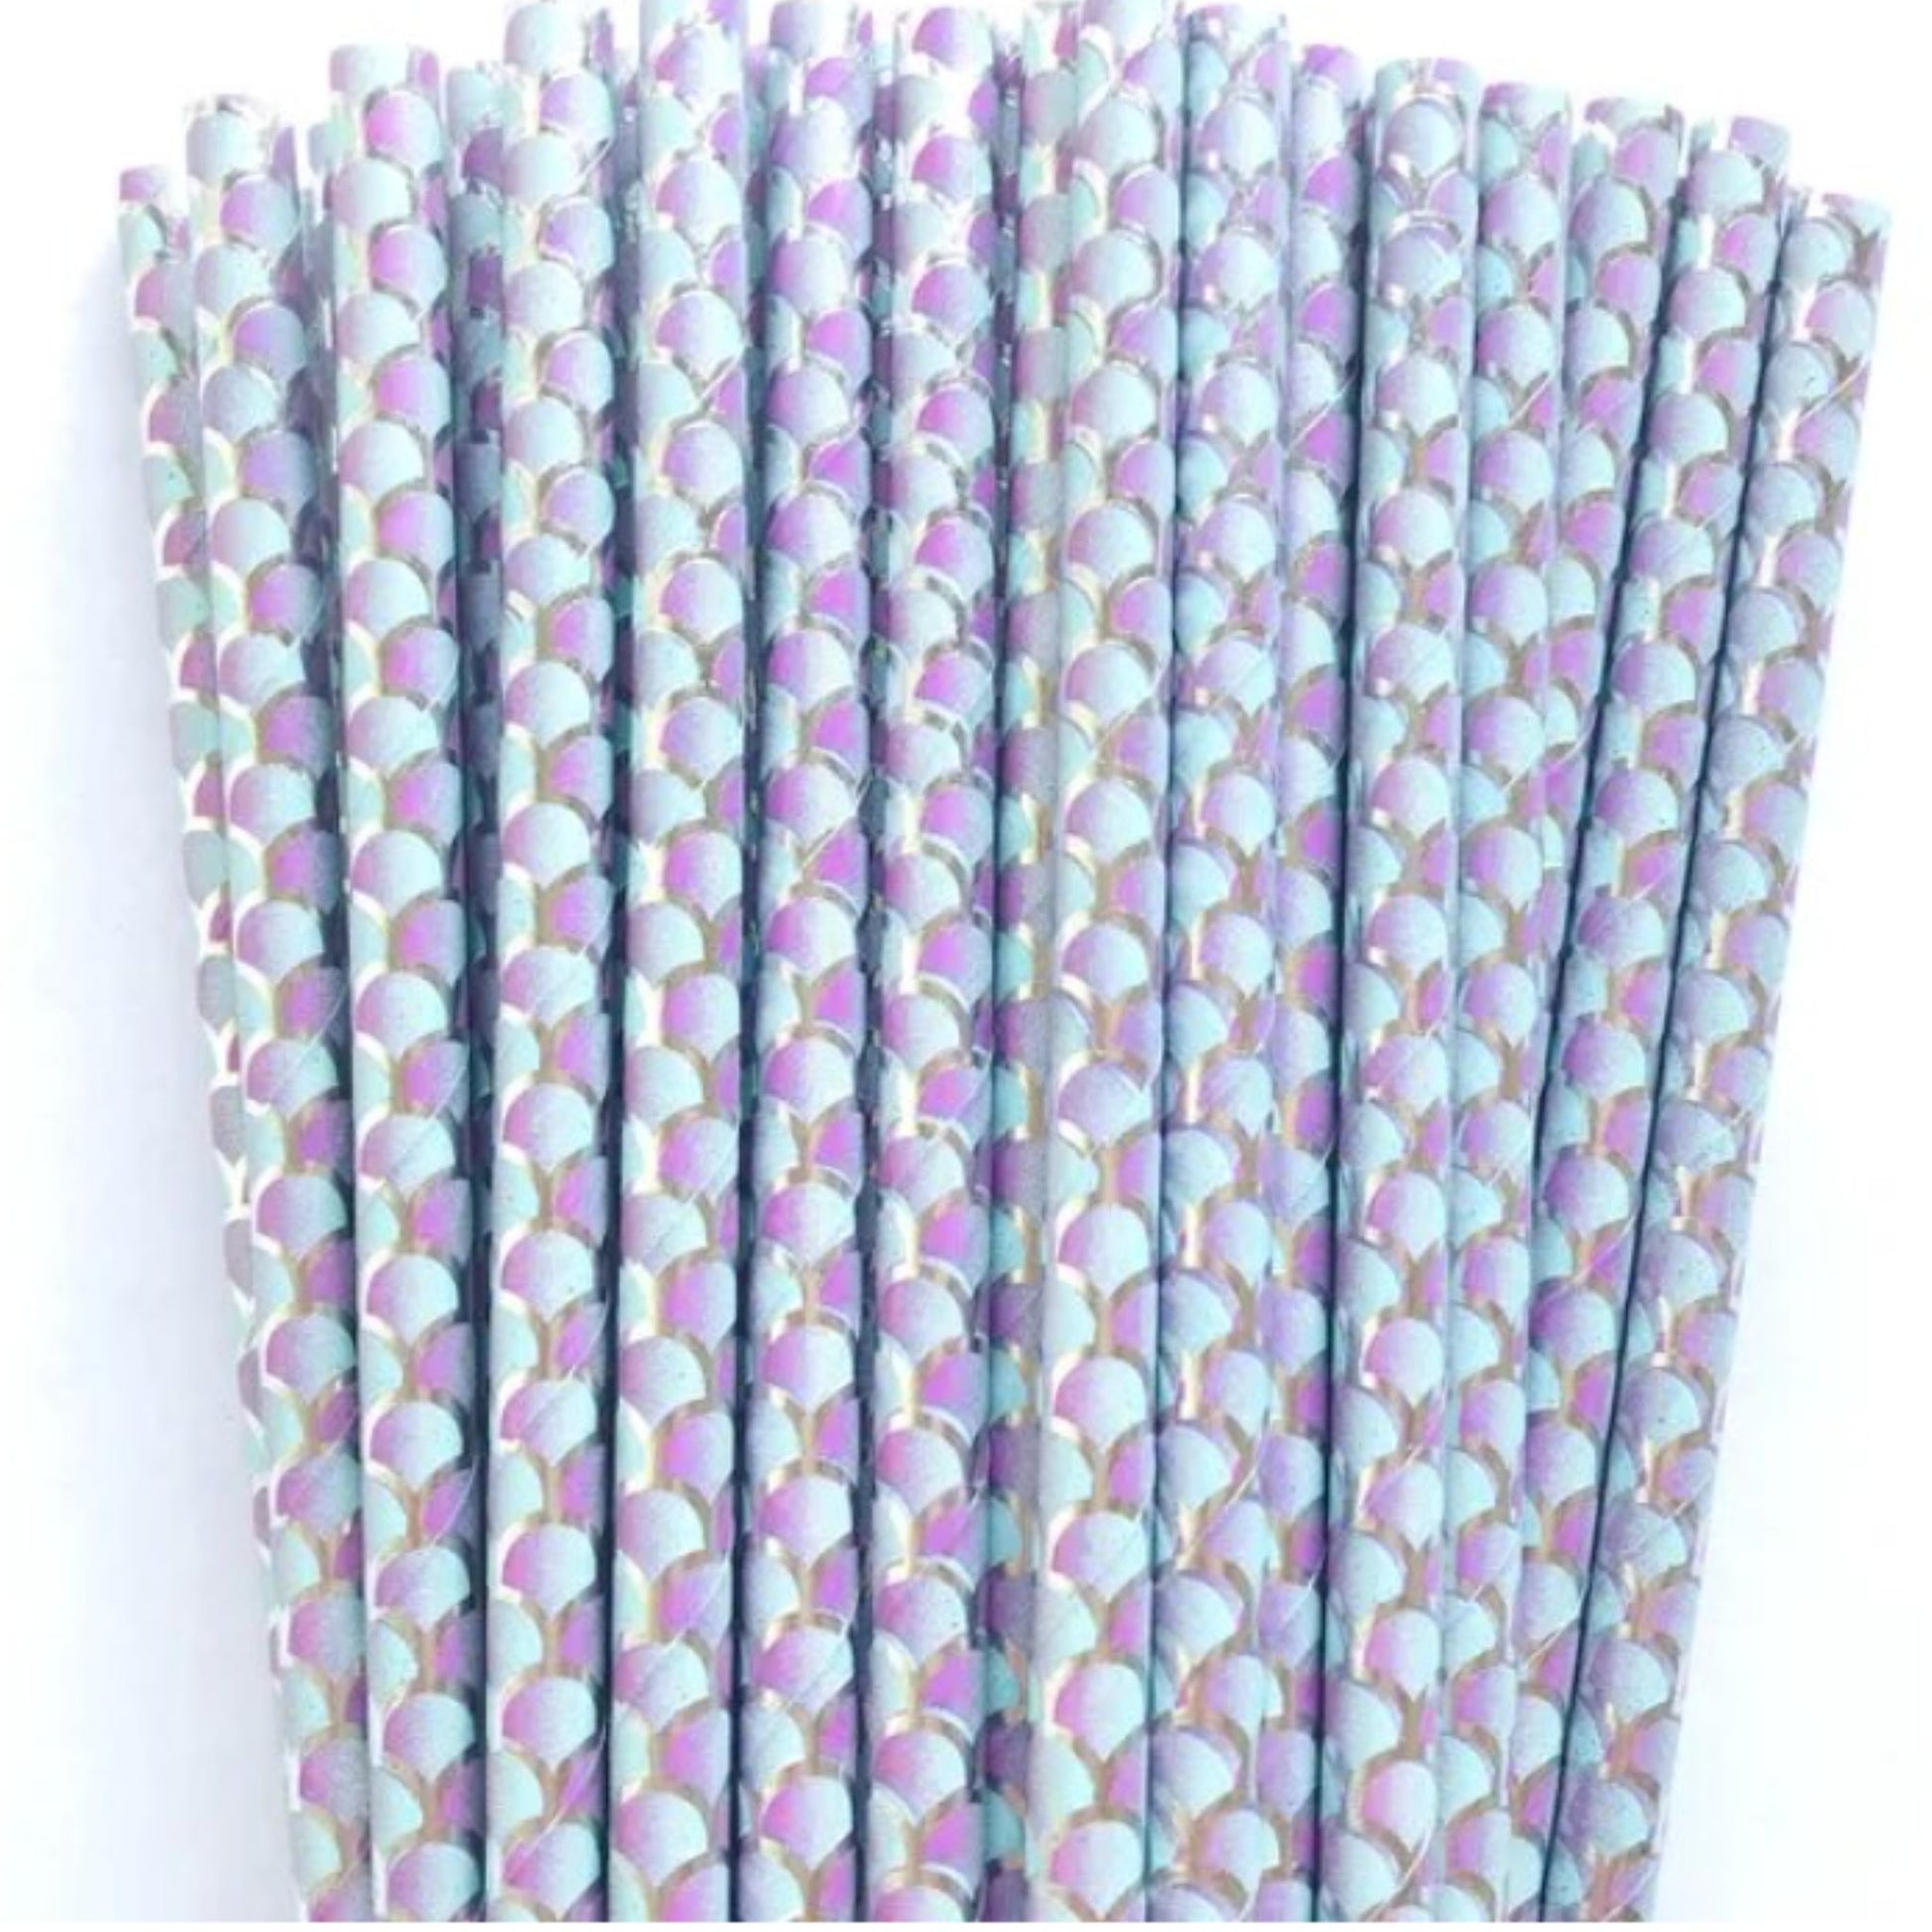 Iridescent mermaid paper straws in mints and lilacs.